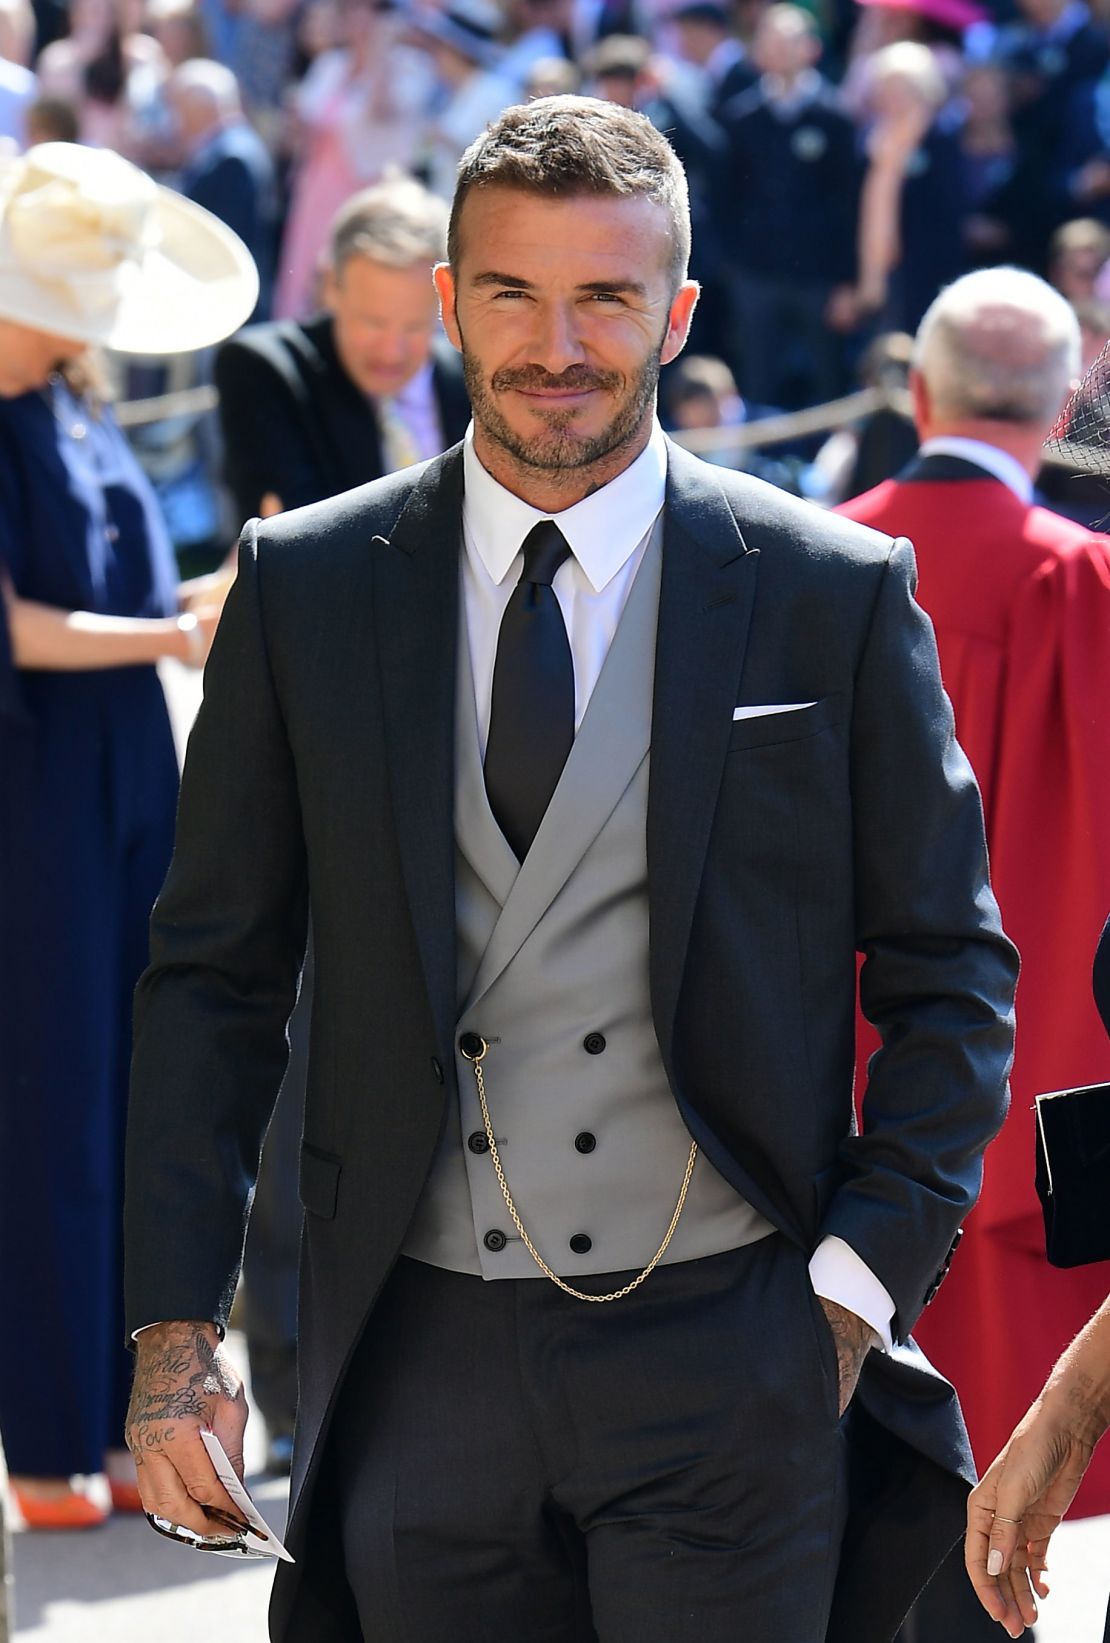 David Beckham wearing a Kim Jones-designed morning suit to the wedding ceremony of Prince Harry, Duke of Sussex and Meghan, Duchess of Sussex